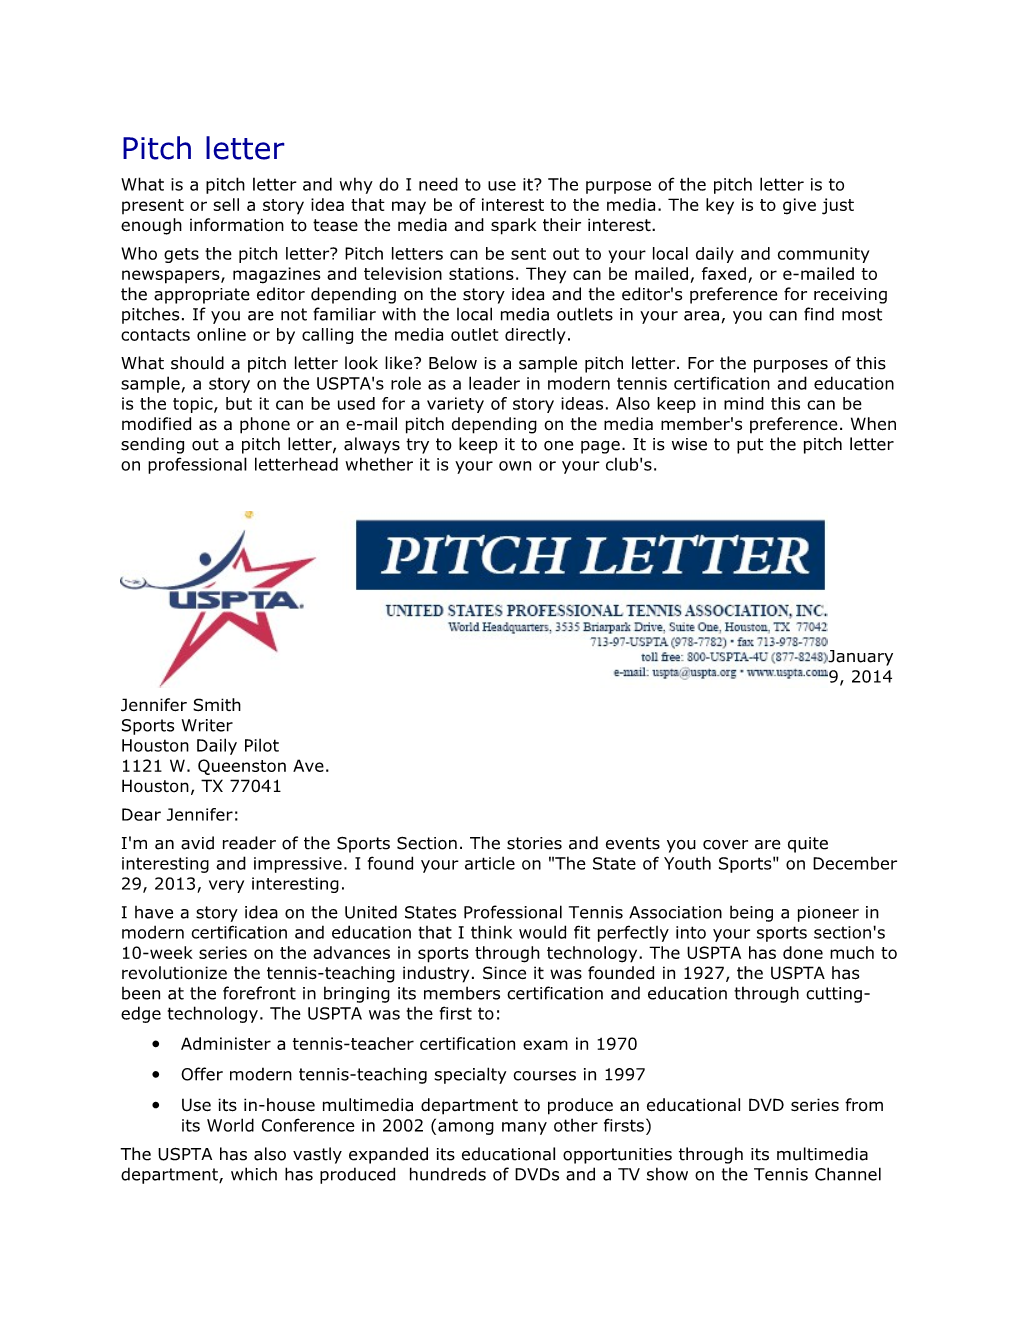 Who Gets the Pitch Letter? Pitch Letters Can Be Sent out to Your Local Daily and Community